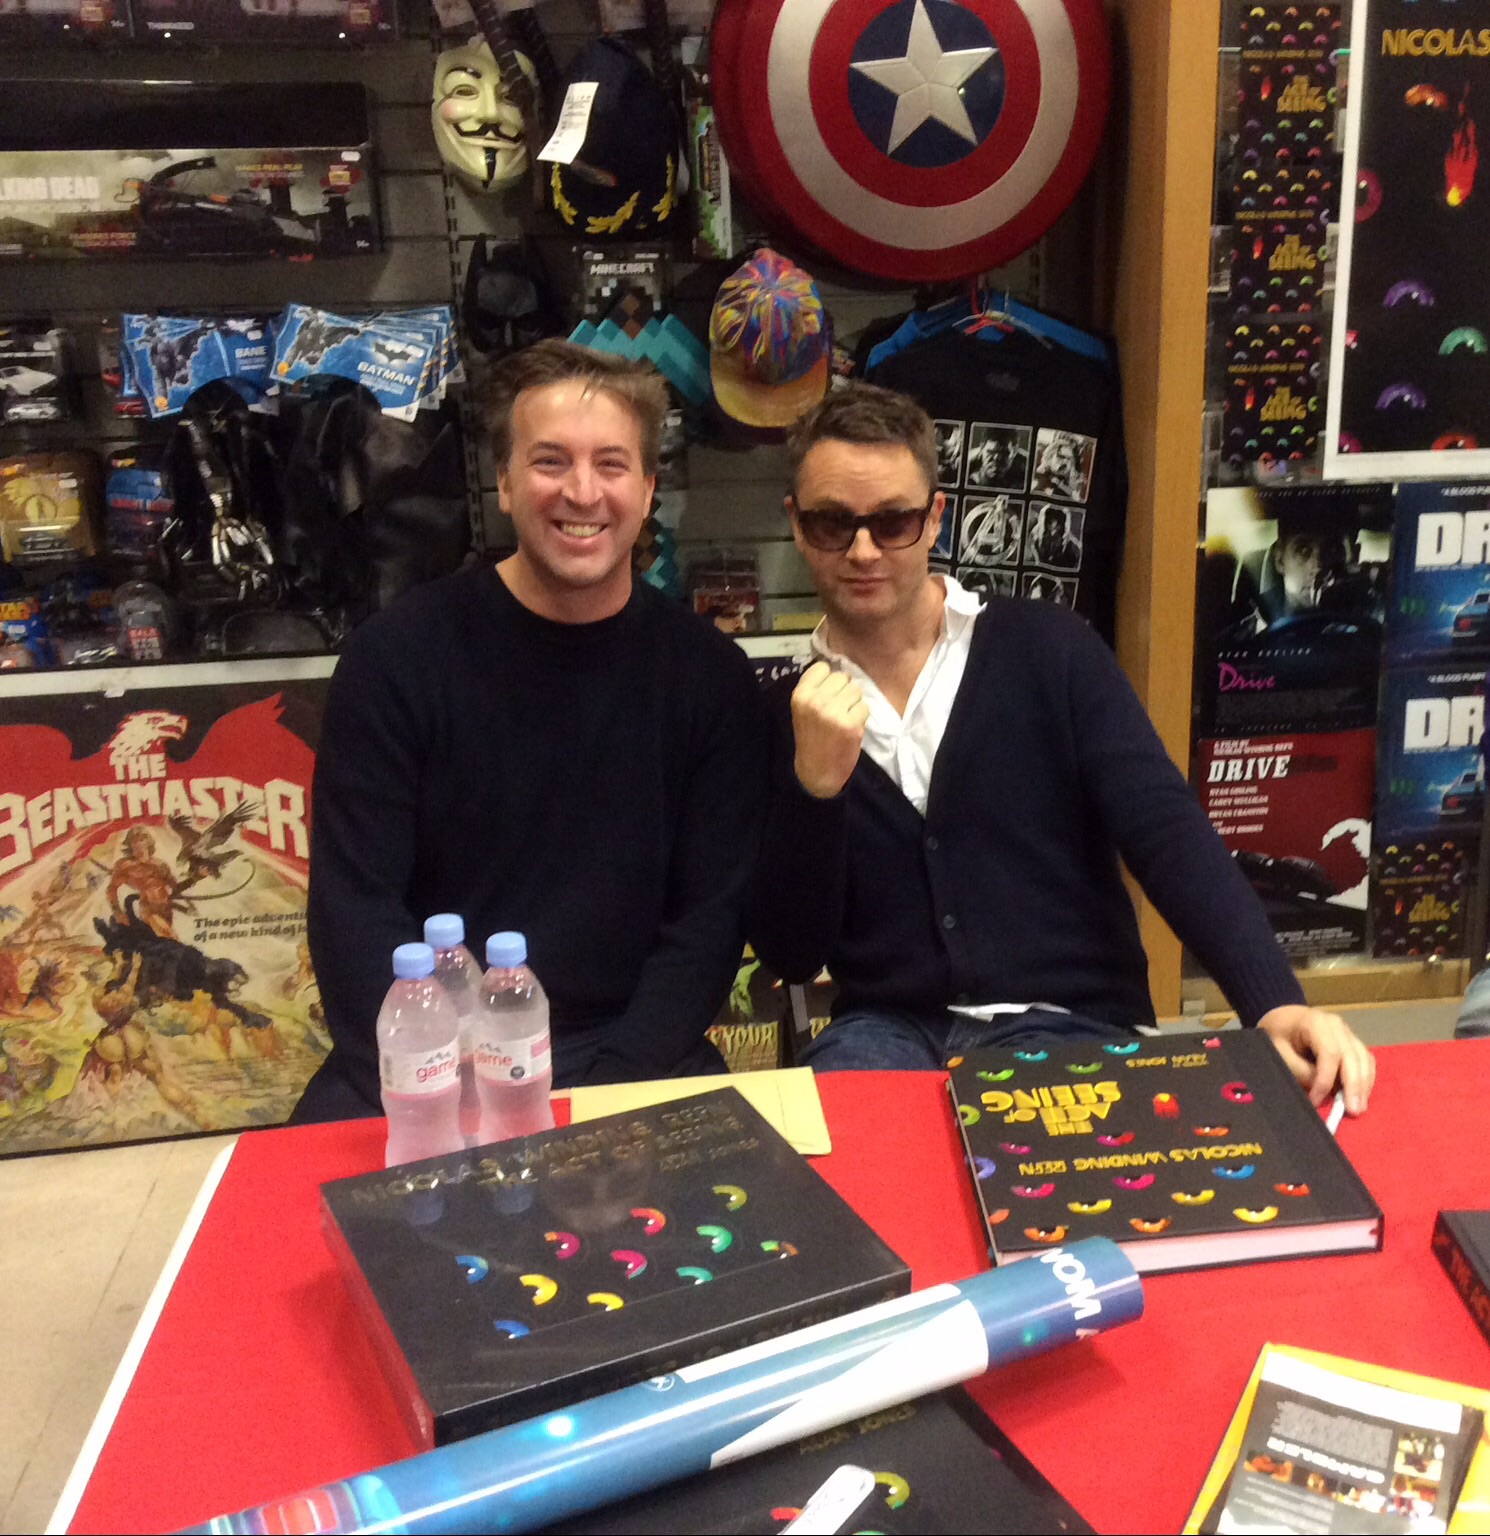 With Nicolas Winding Refn at book signing: The Act of Seeing, at The Cinema Store, London.